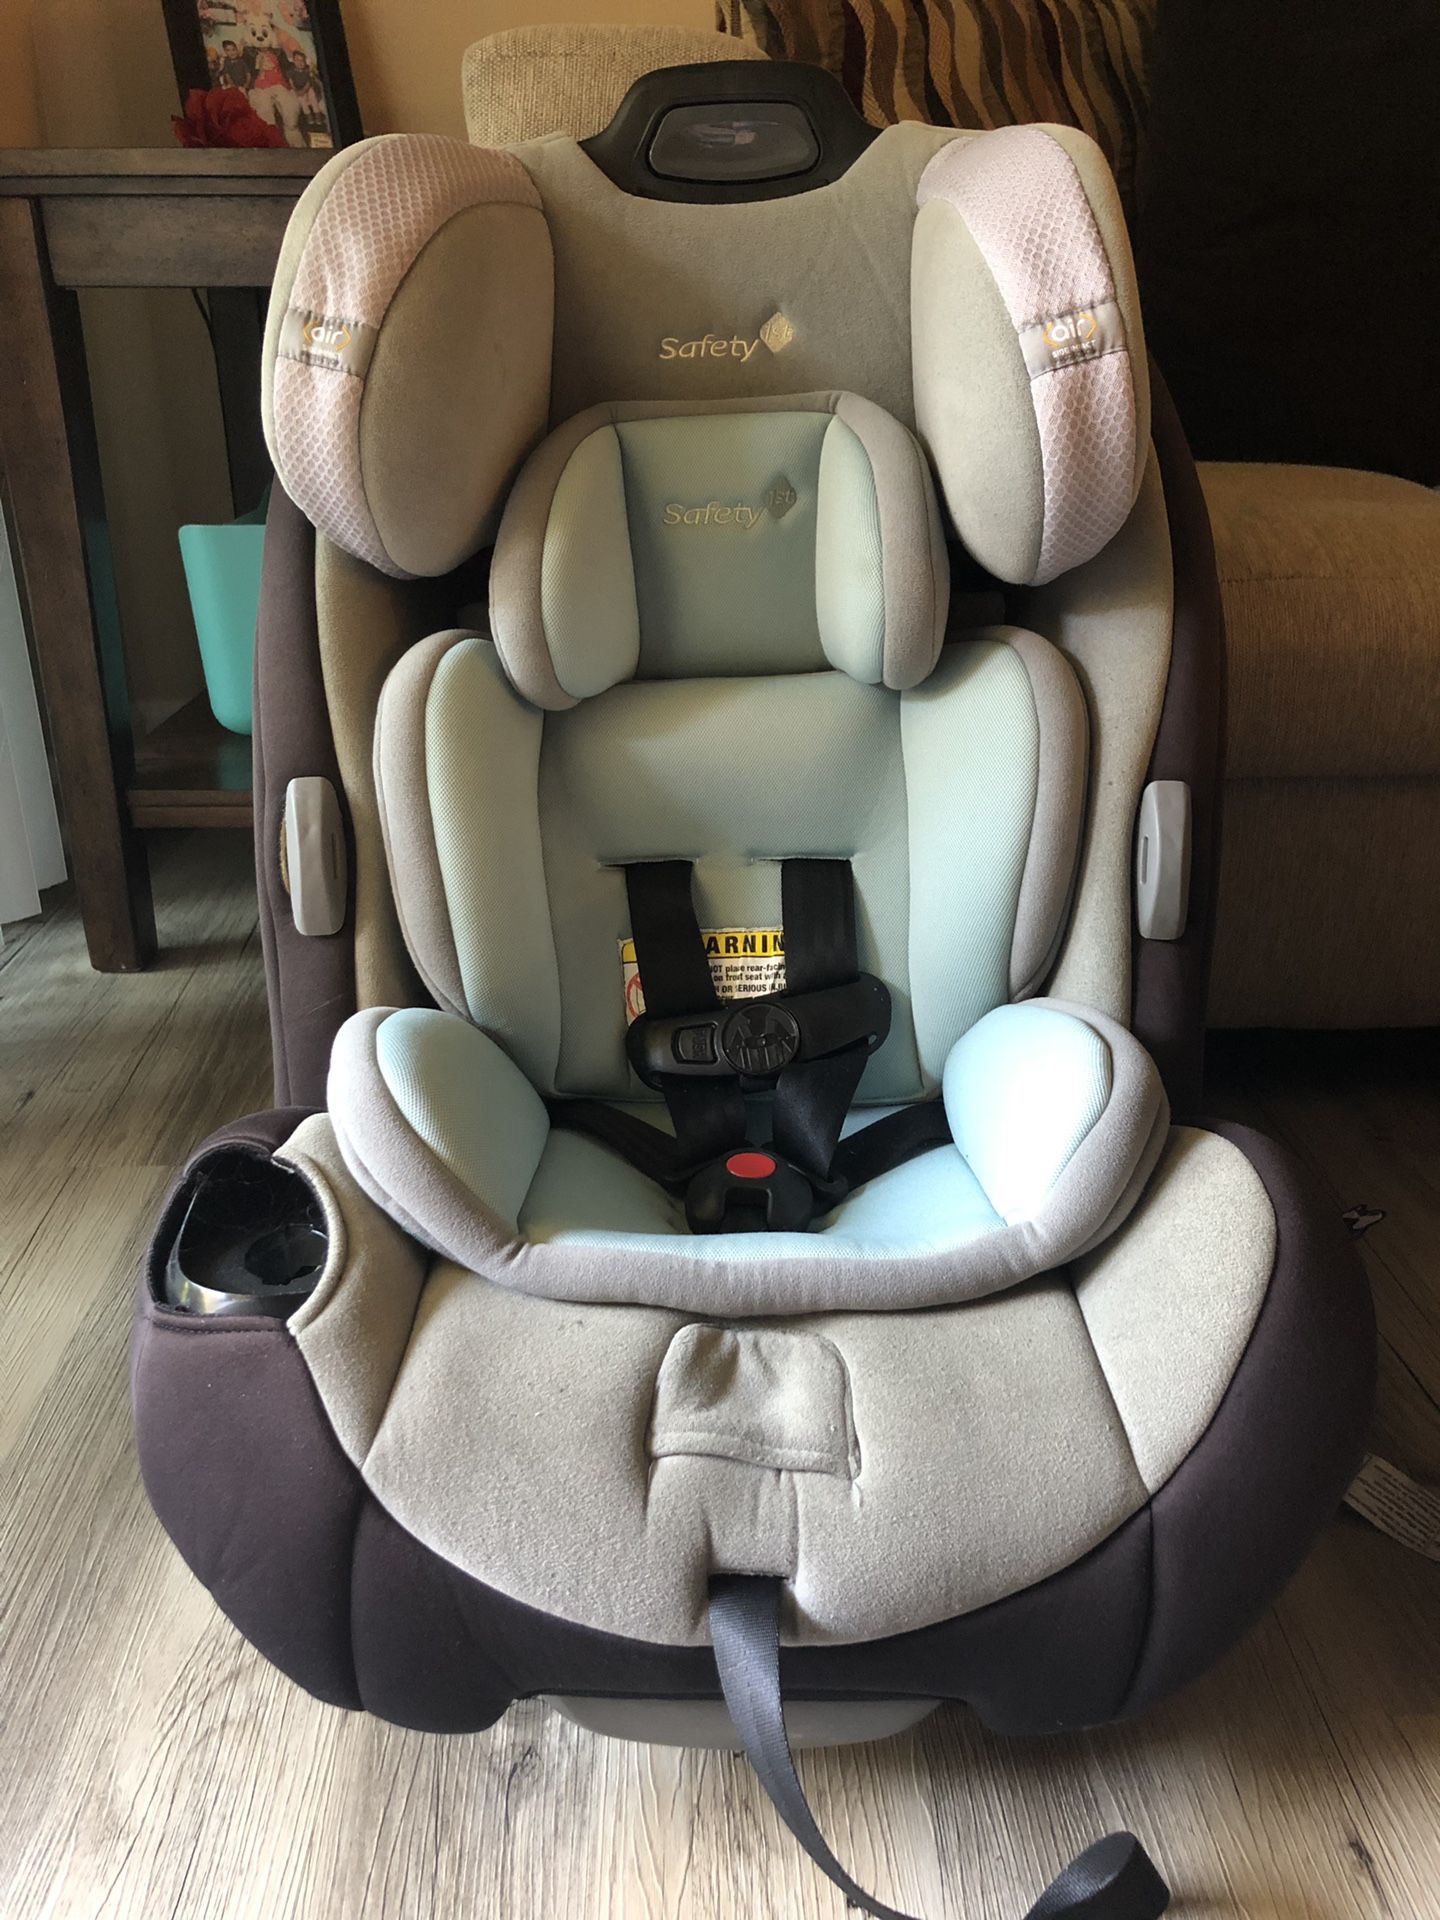 Safety 1st Car seat